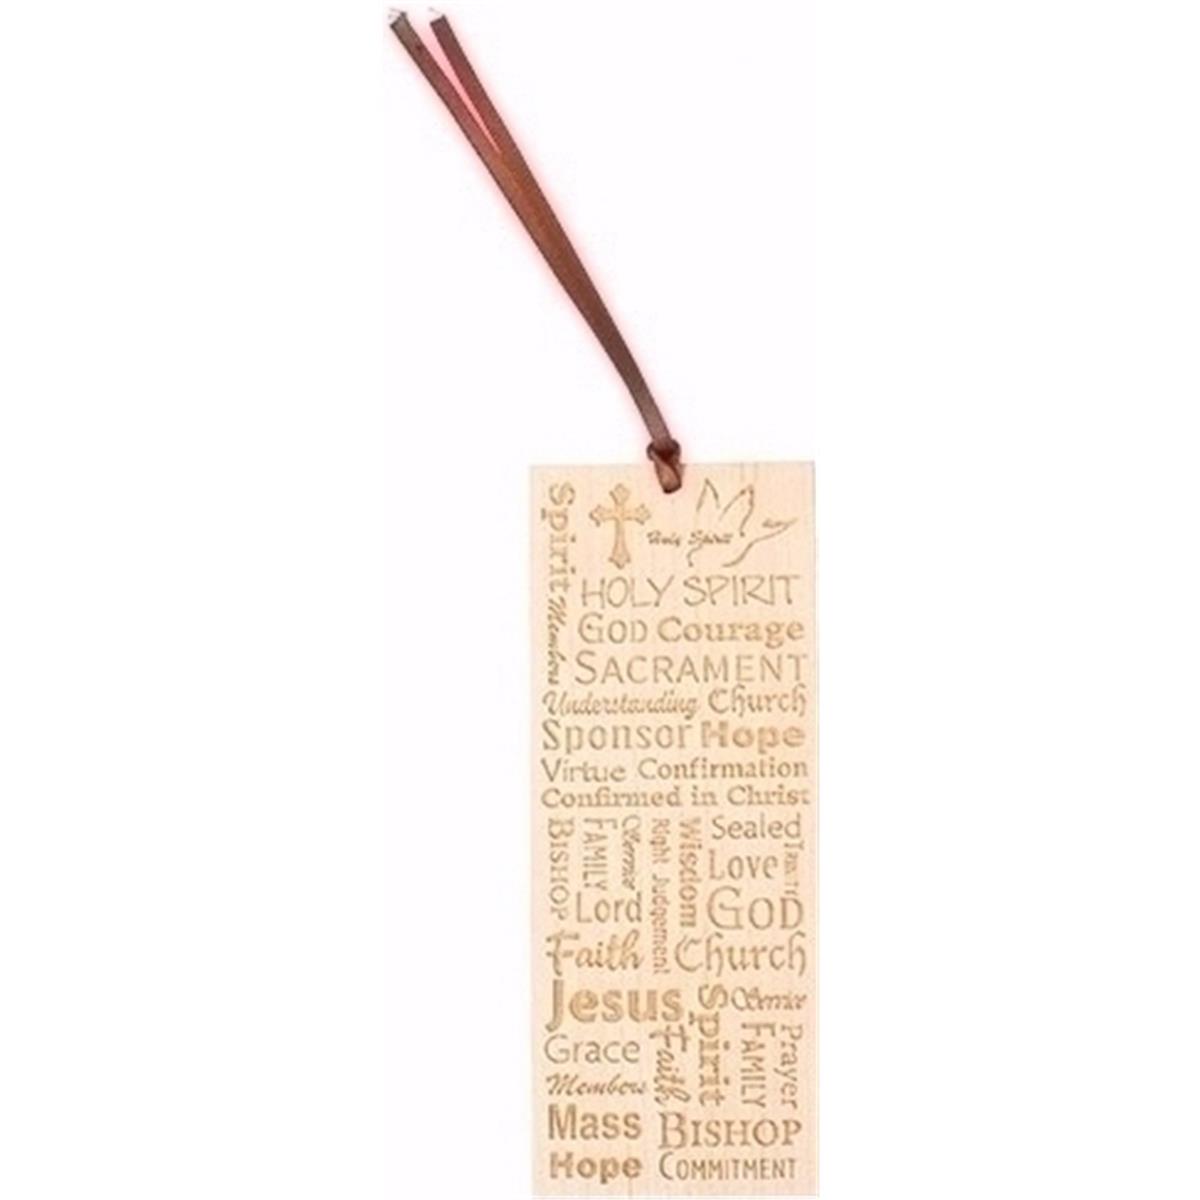 164278 Bookmark Confirmation Carded